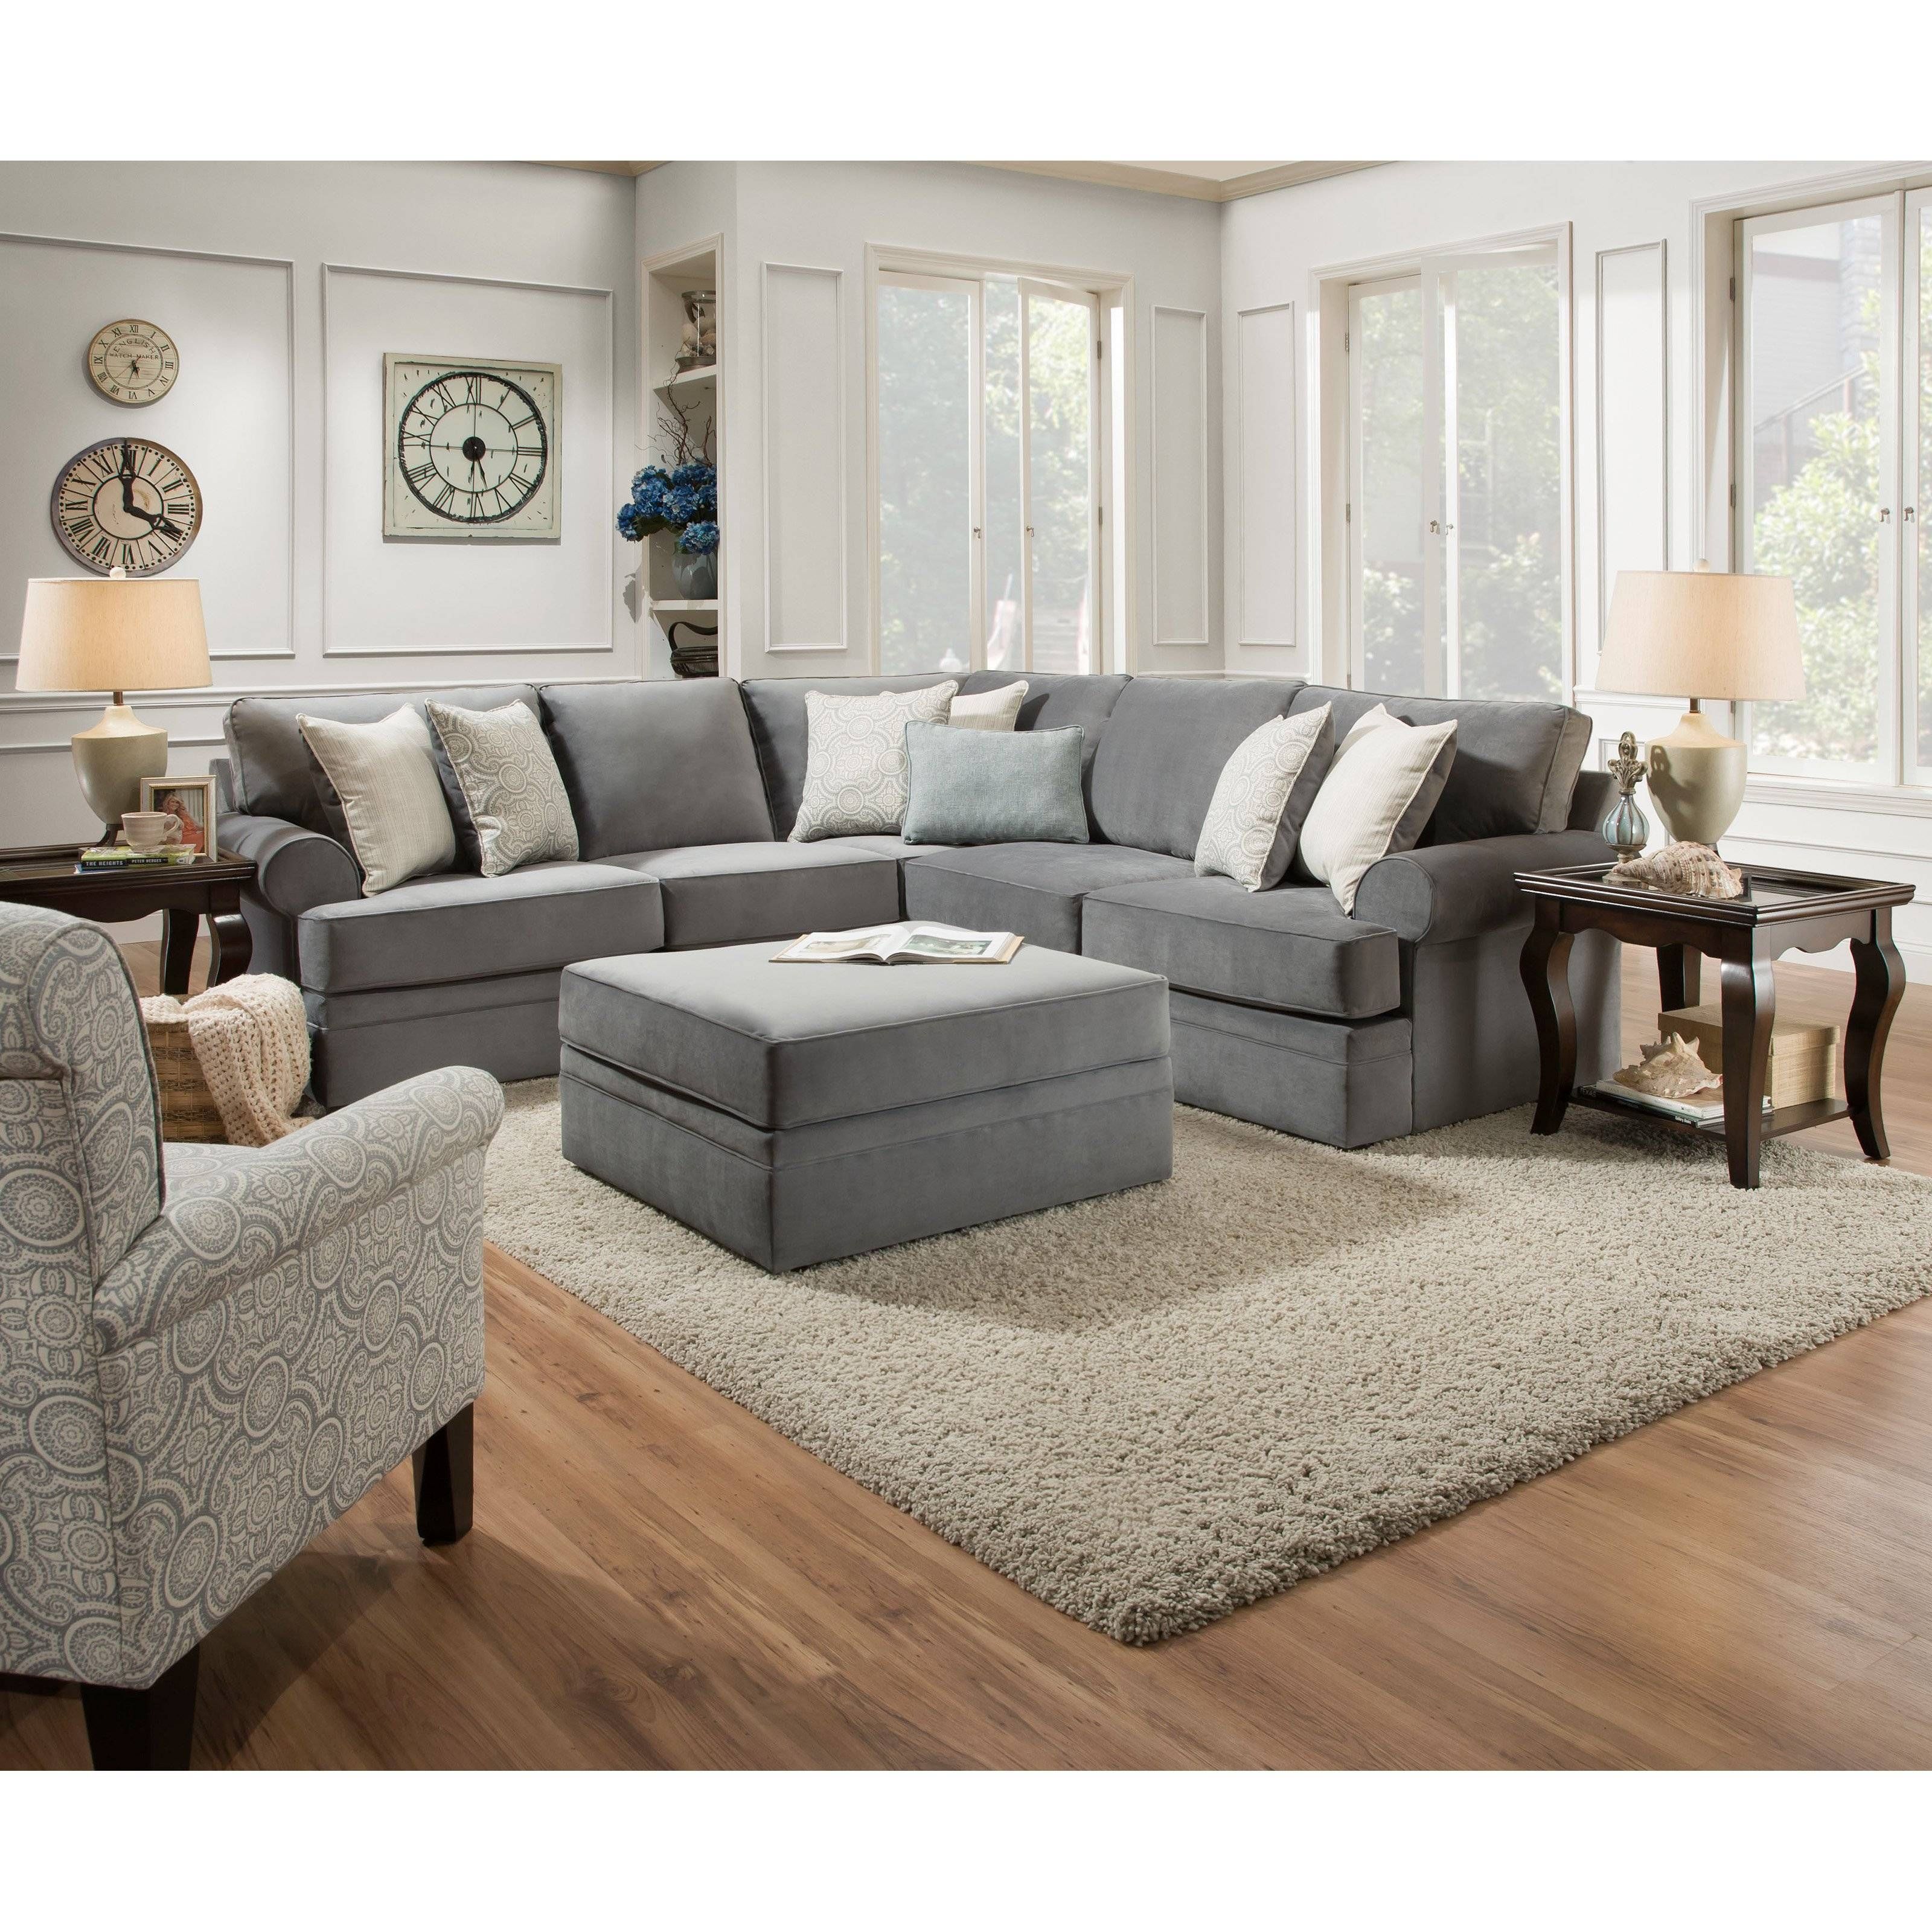 Simmons Upholstery Dublin Briar Sectional Sofa | Hayneedle Intended For Simmons Sectional Sofas (Photo 30 of 30)